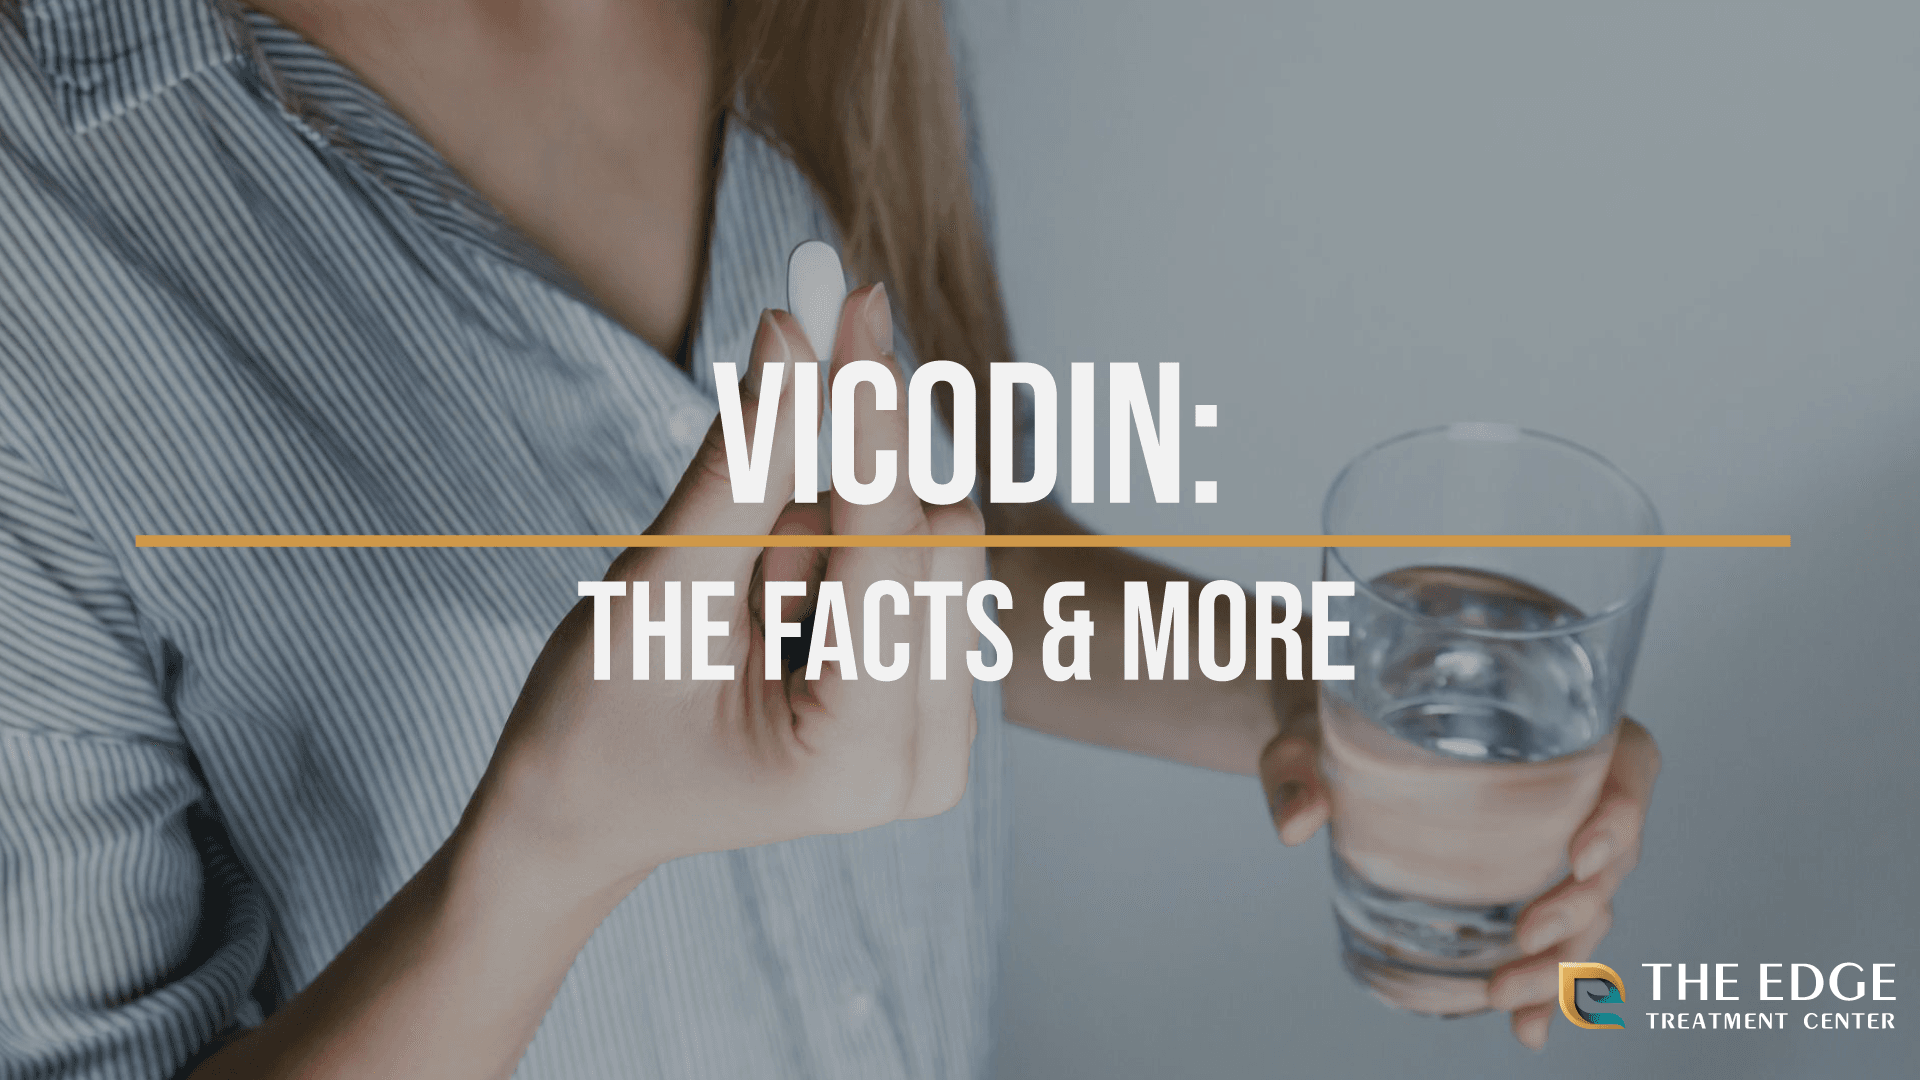 What is Vicodin?